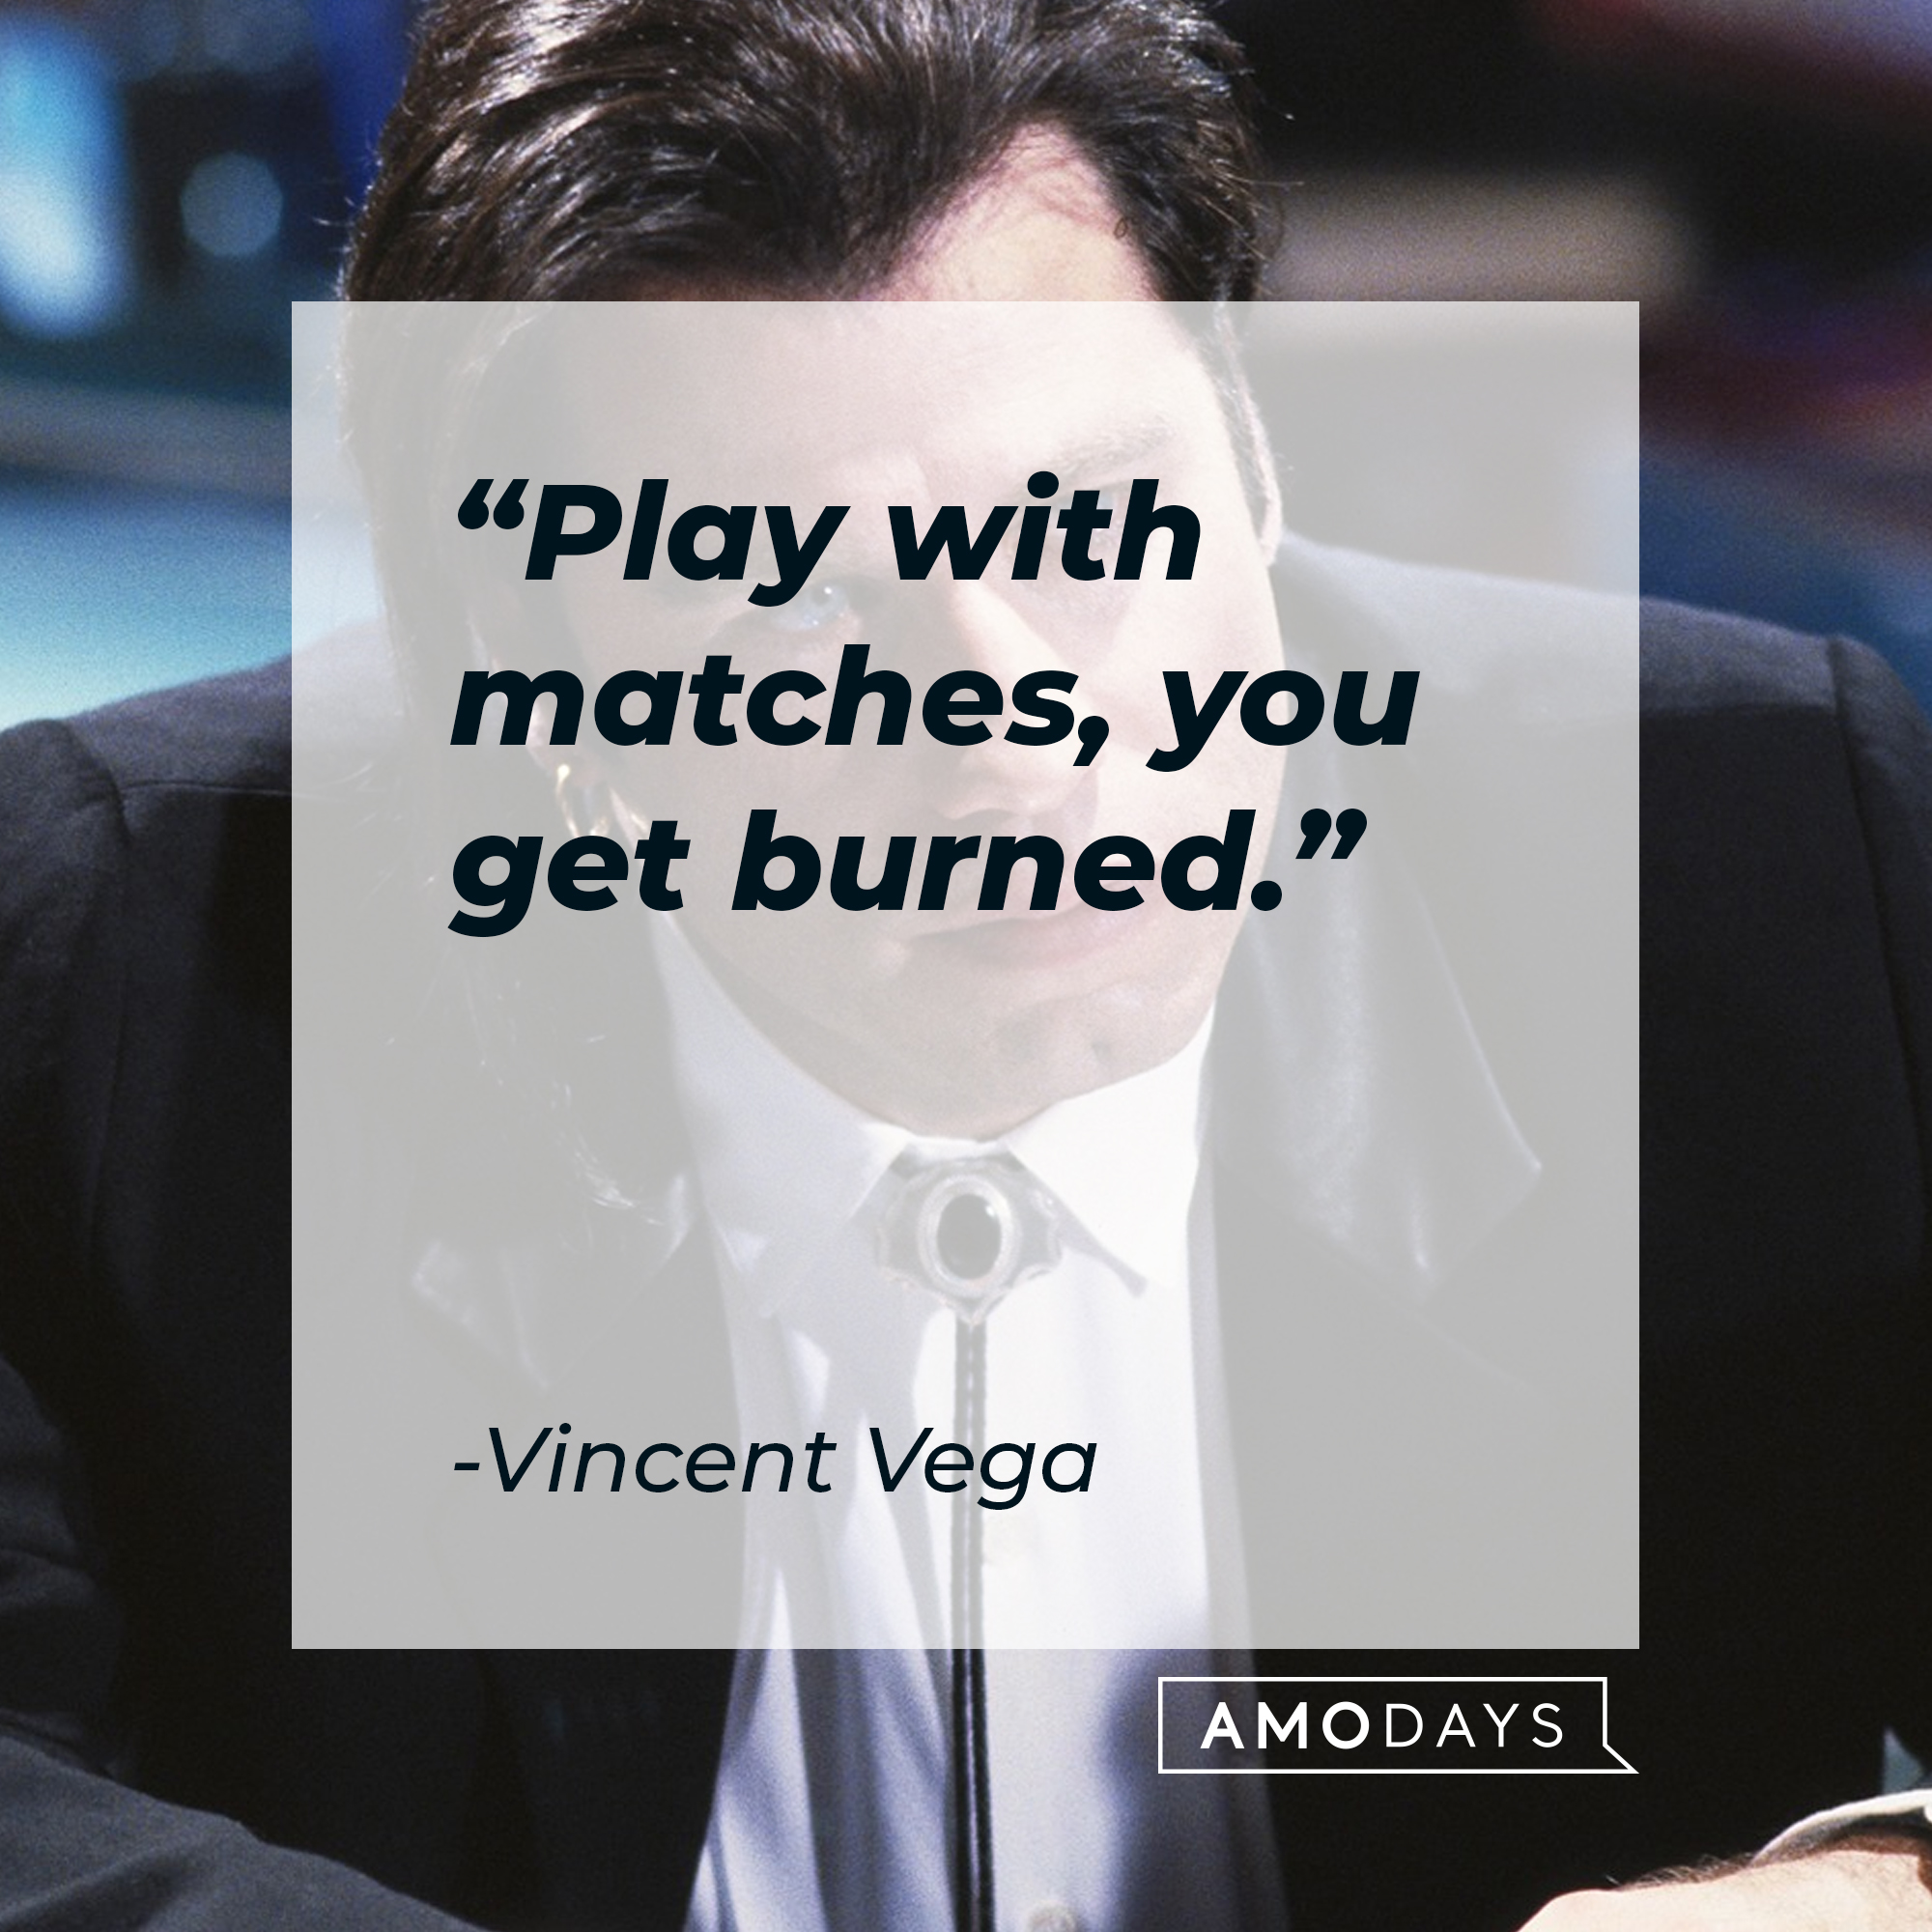 Vincent Vega, with his quote: "Play with matches, you get burned." │Source: facebook.com/PulpFiction